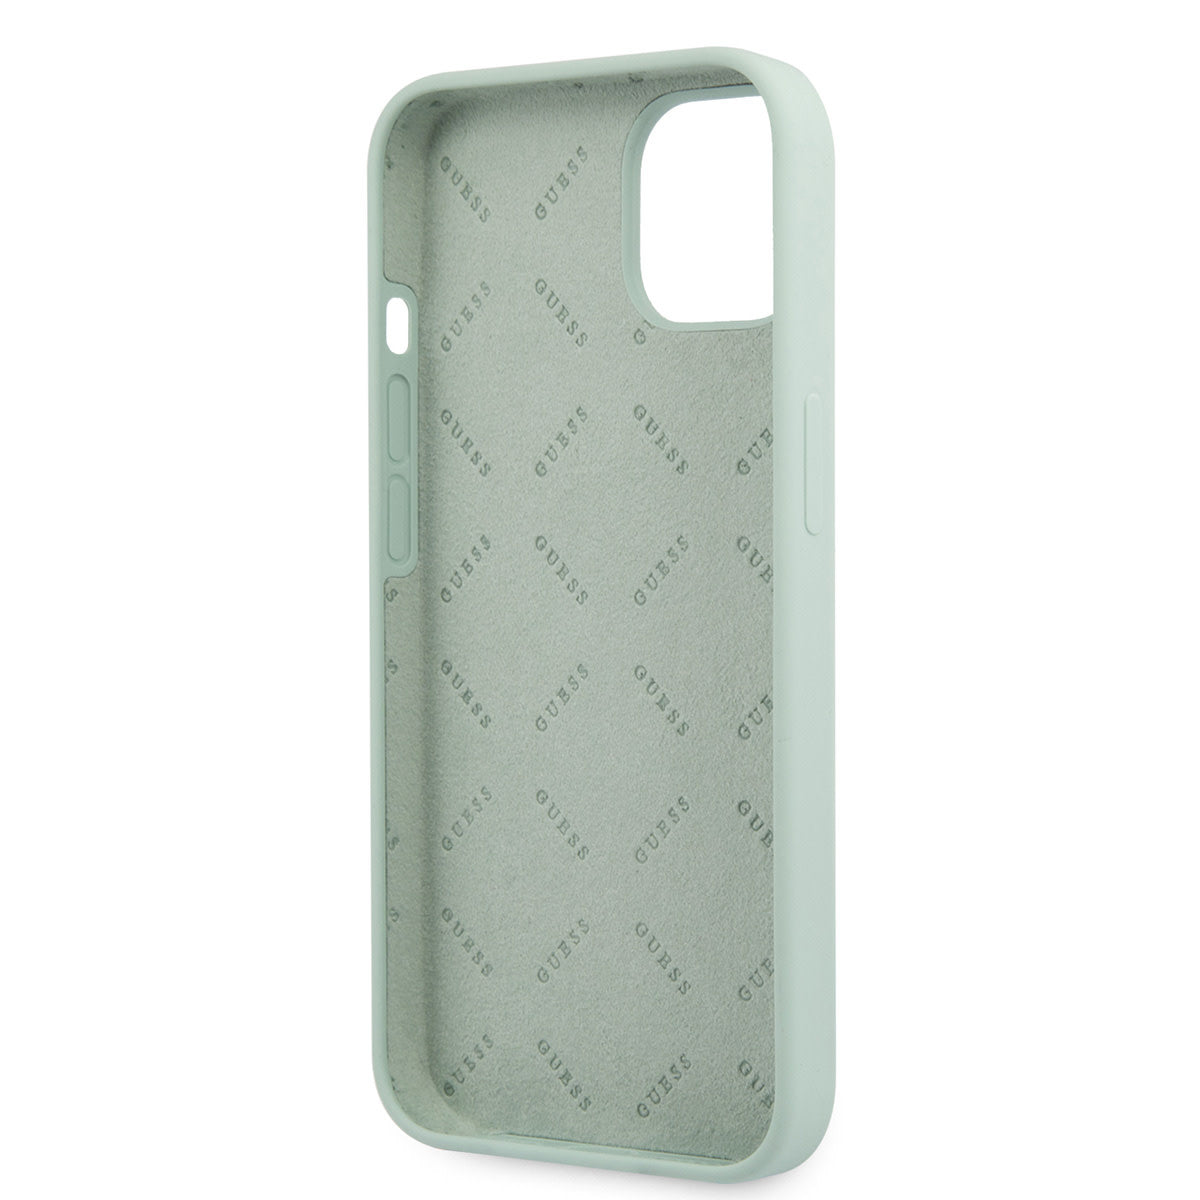 Guess iPhone 13 MINI Hardcase Backcover - Wit 4G Logo - Mint Groen